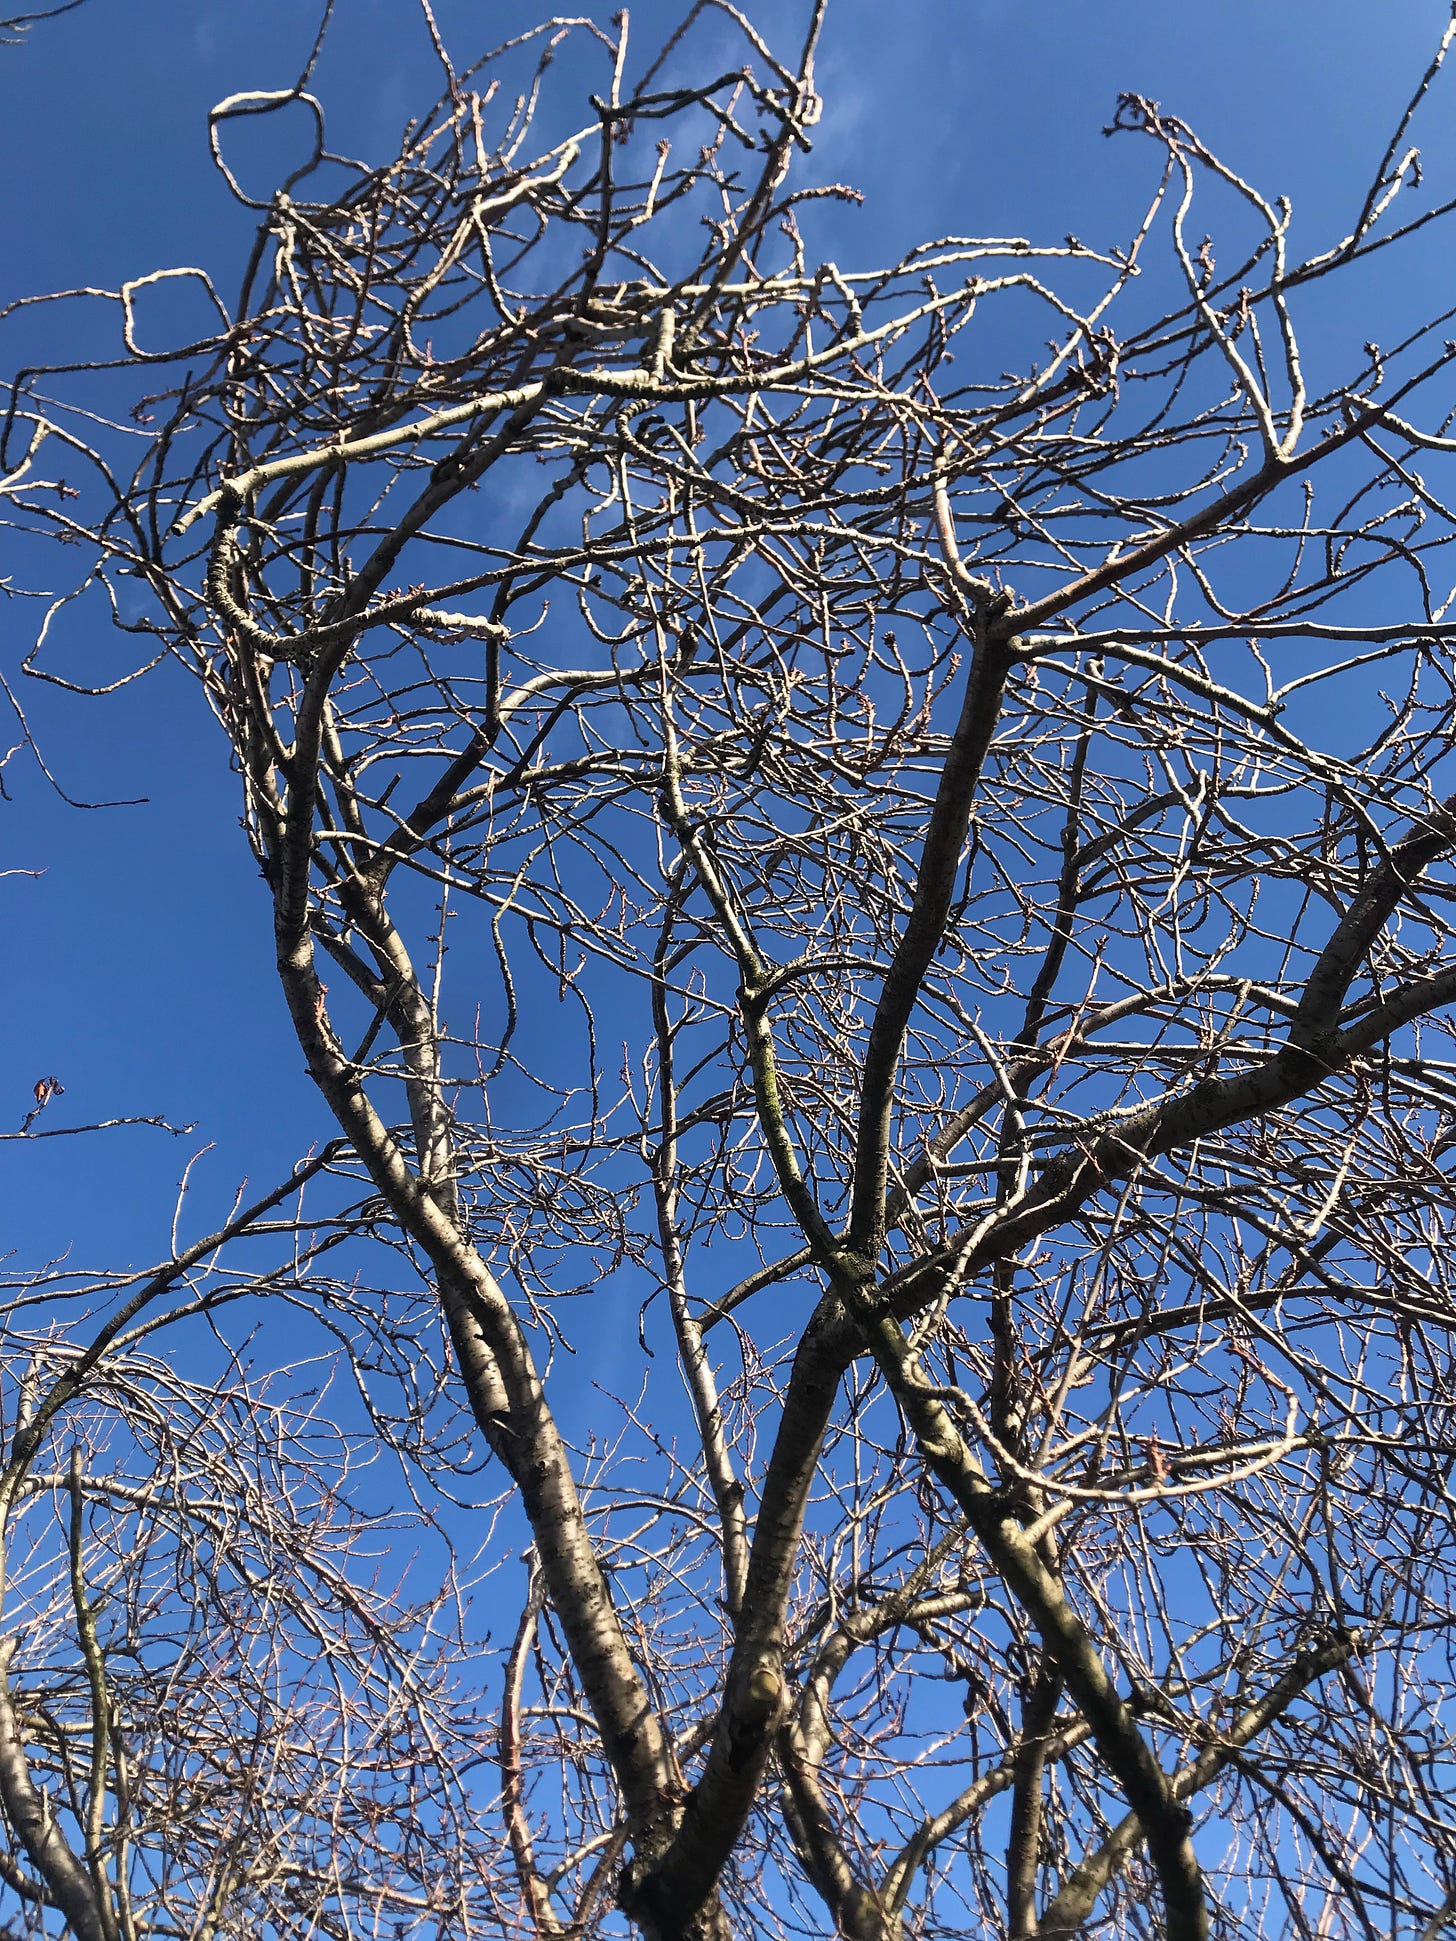 Photo taken from below of bare, wintry tree branches lit up by the sun, against a bright blue sky